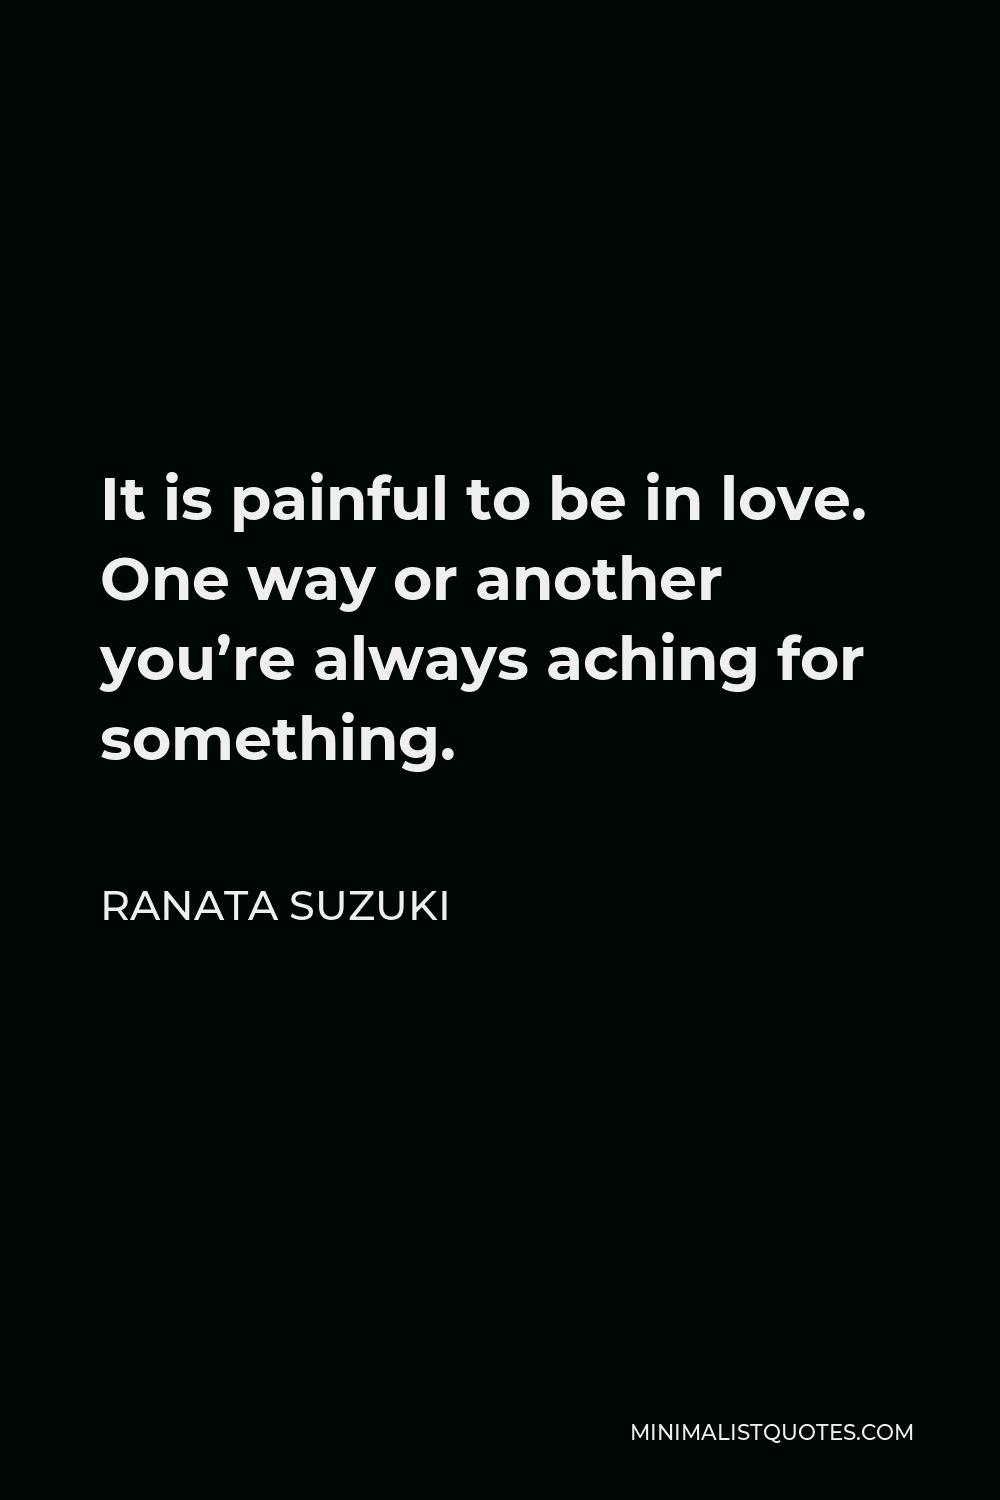 Ranata Suzuki Quote - It is painful to be in love. One way or another you’re always aching for something.